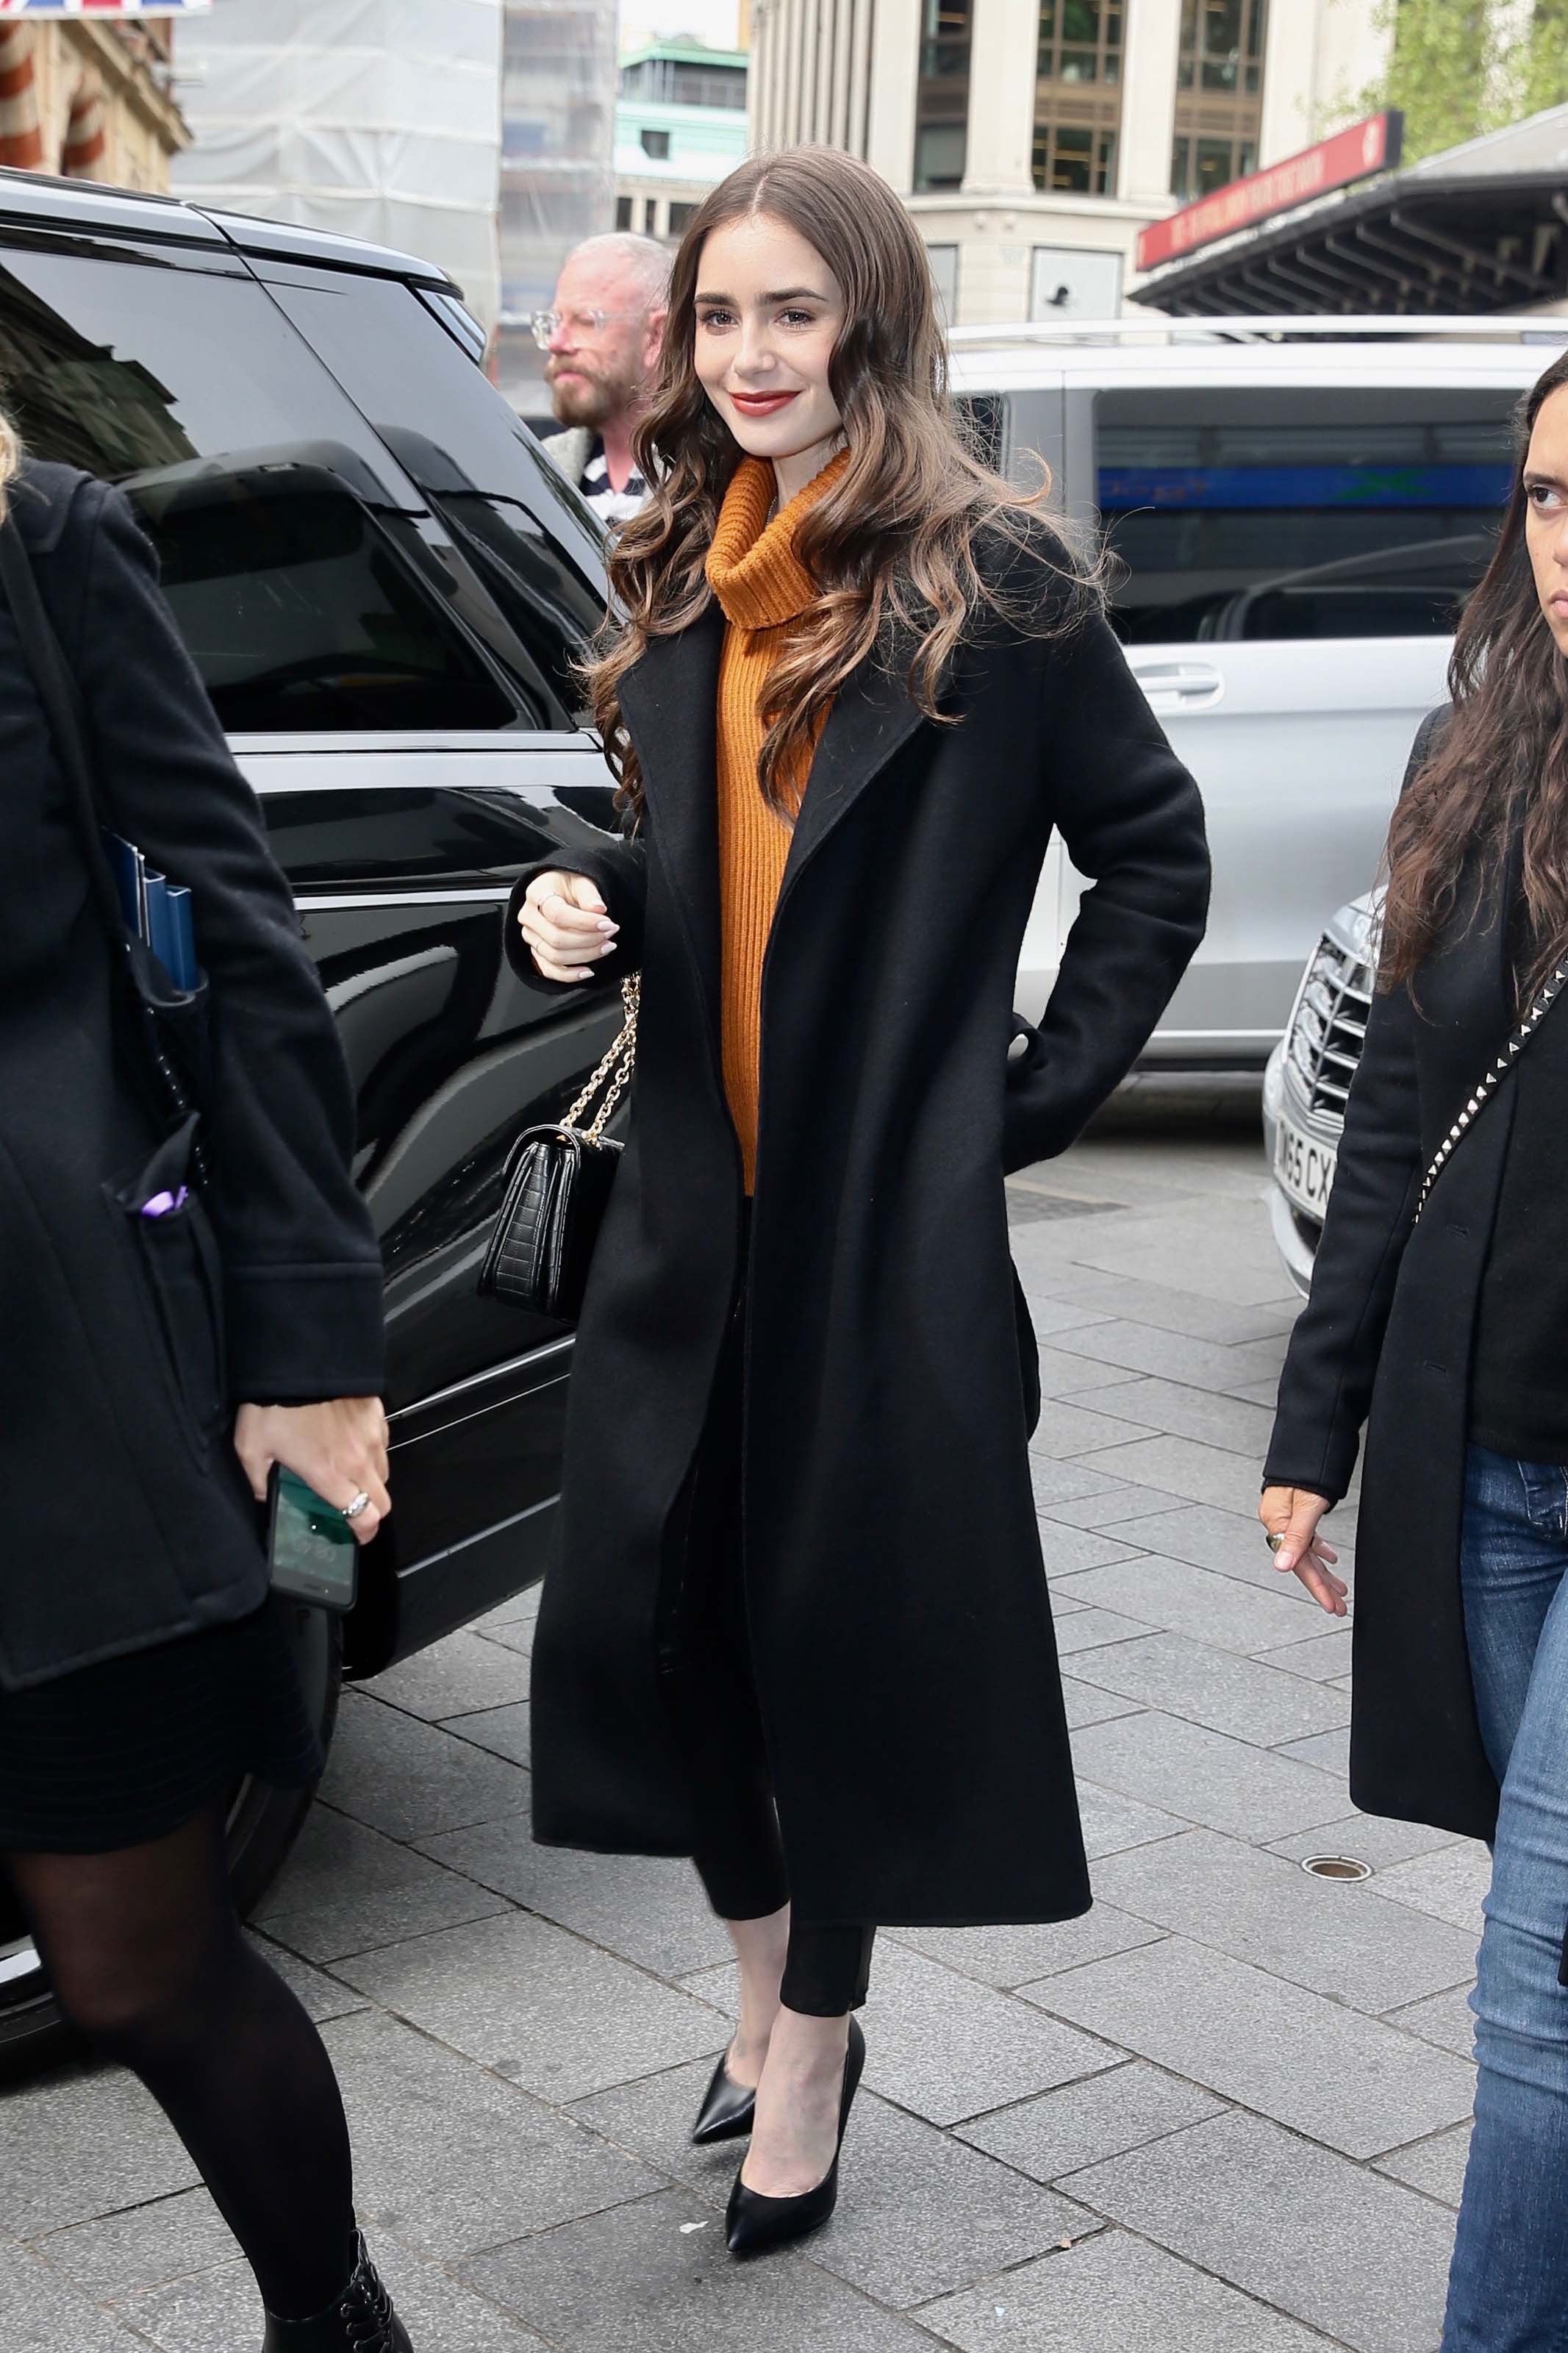 Lily Collins seen arriving at Global studios for radio interviews in London, 04/29/2019